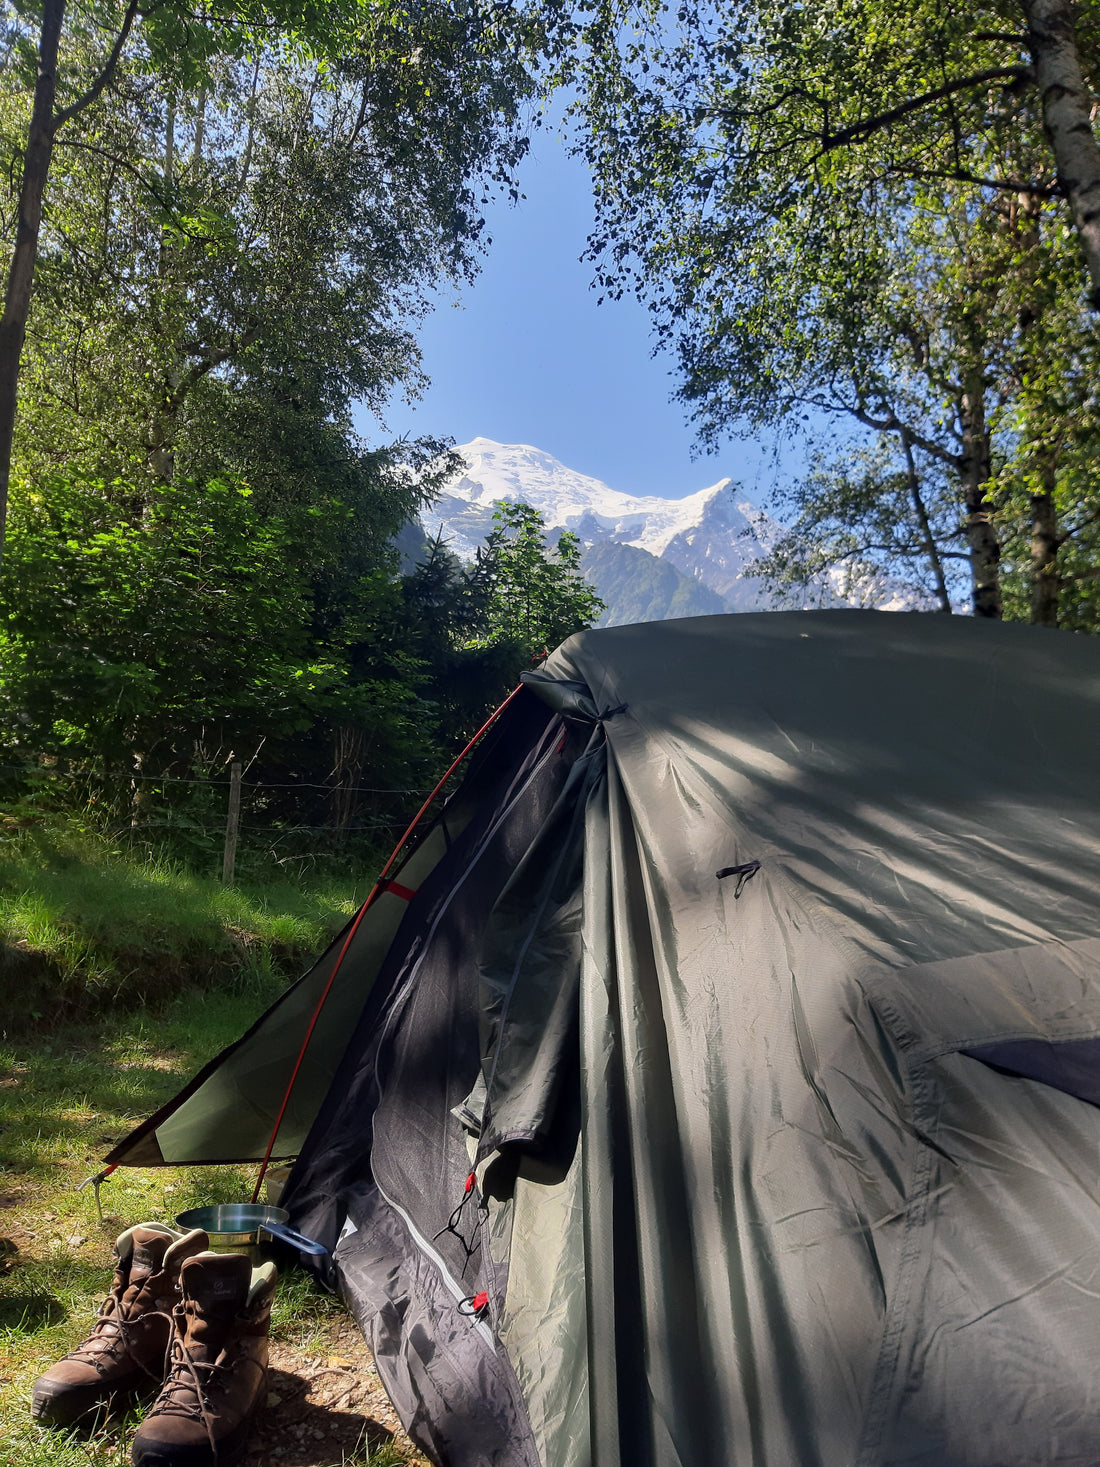 Summers day camping scenes with Mont Blanc Mountain in the background.